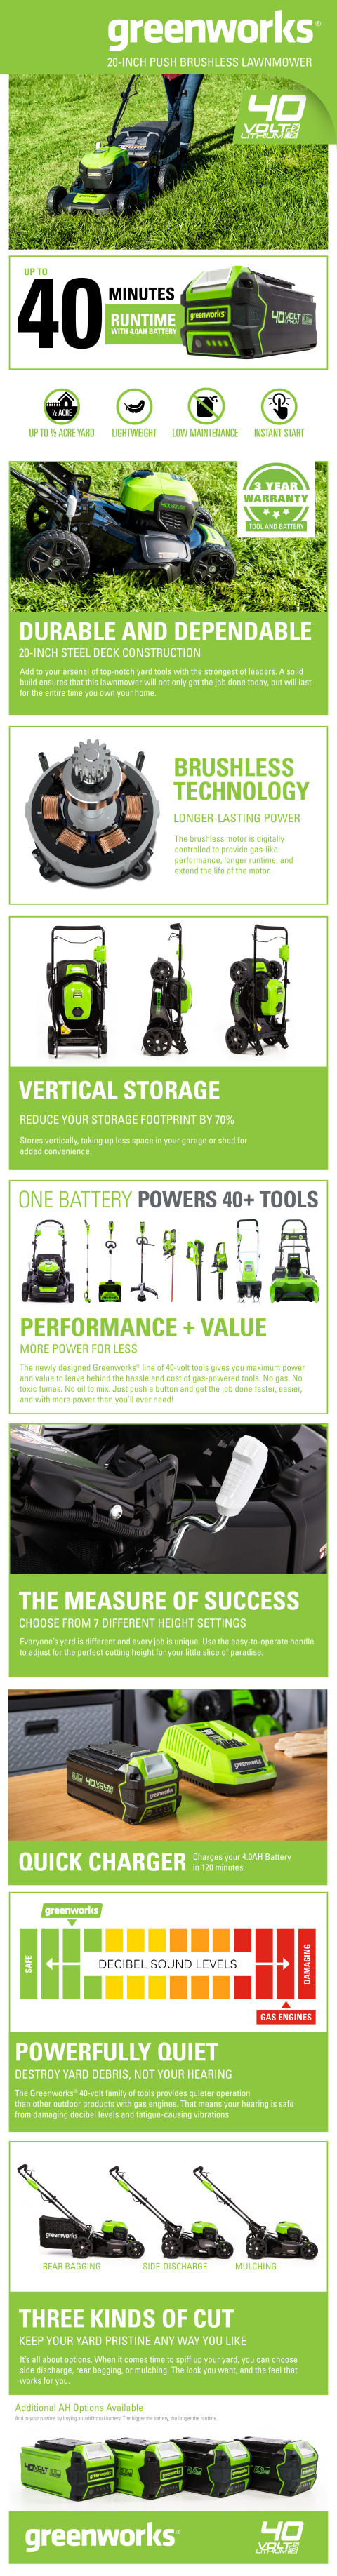 Greenworks 40V 20 Brushless Push Lawn Mower with 4.0 Ah Battery & Quick  Charger 2516302VT 